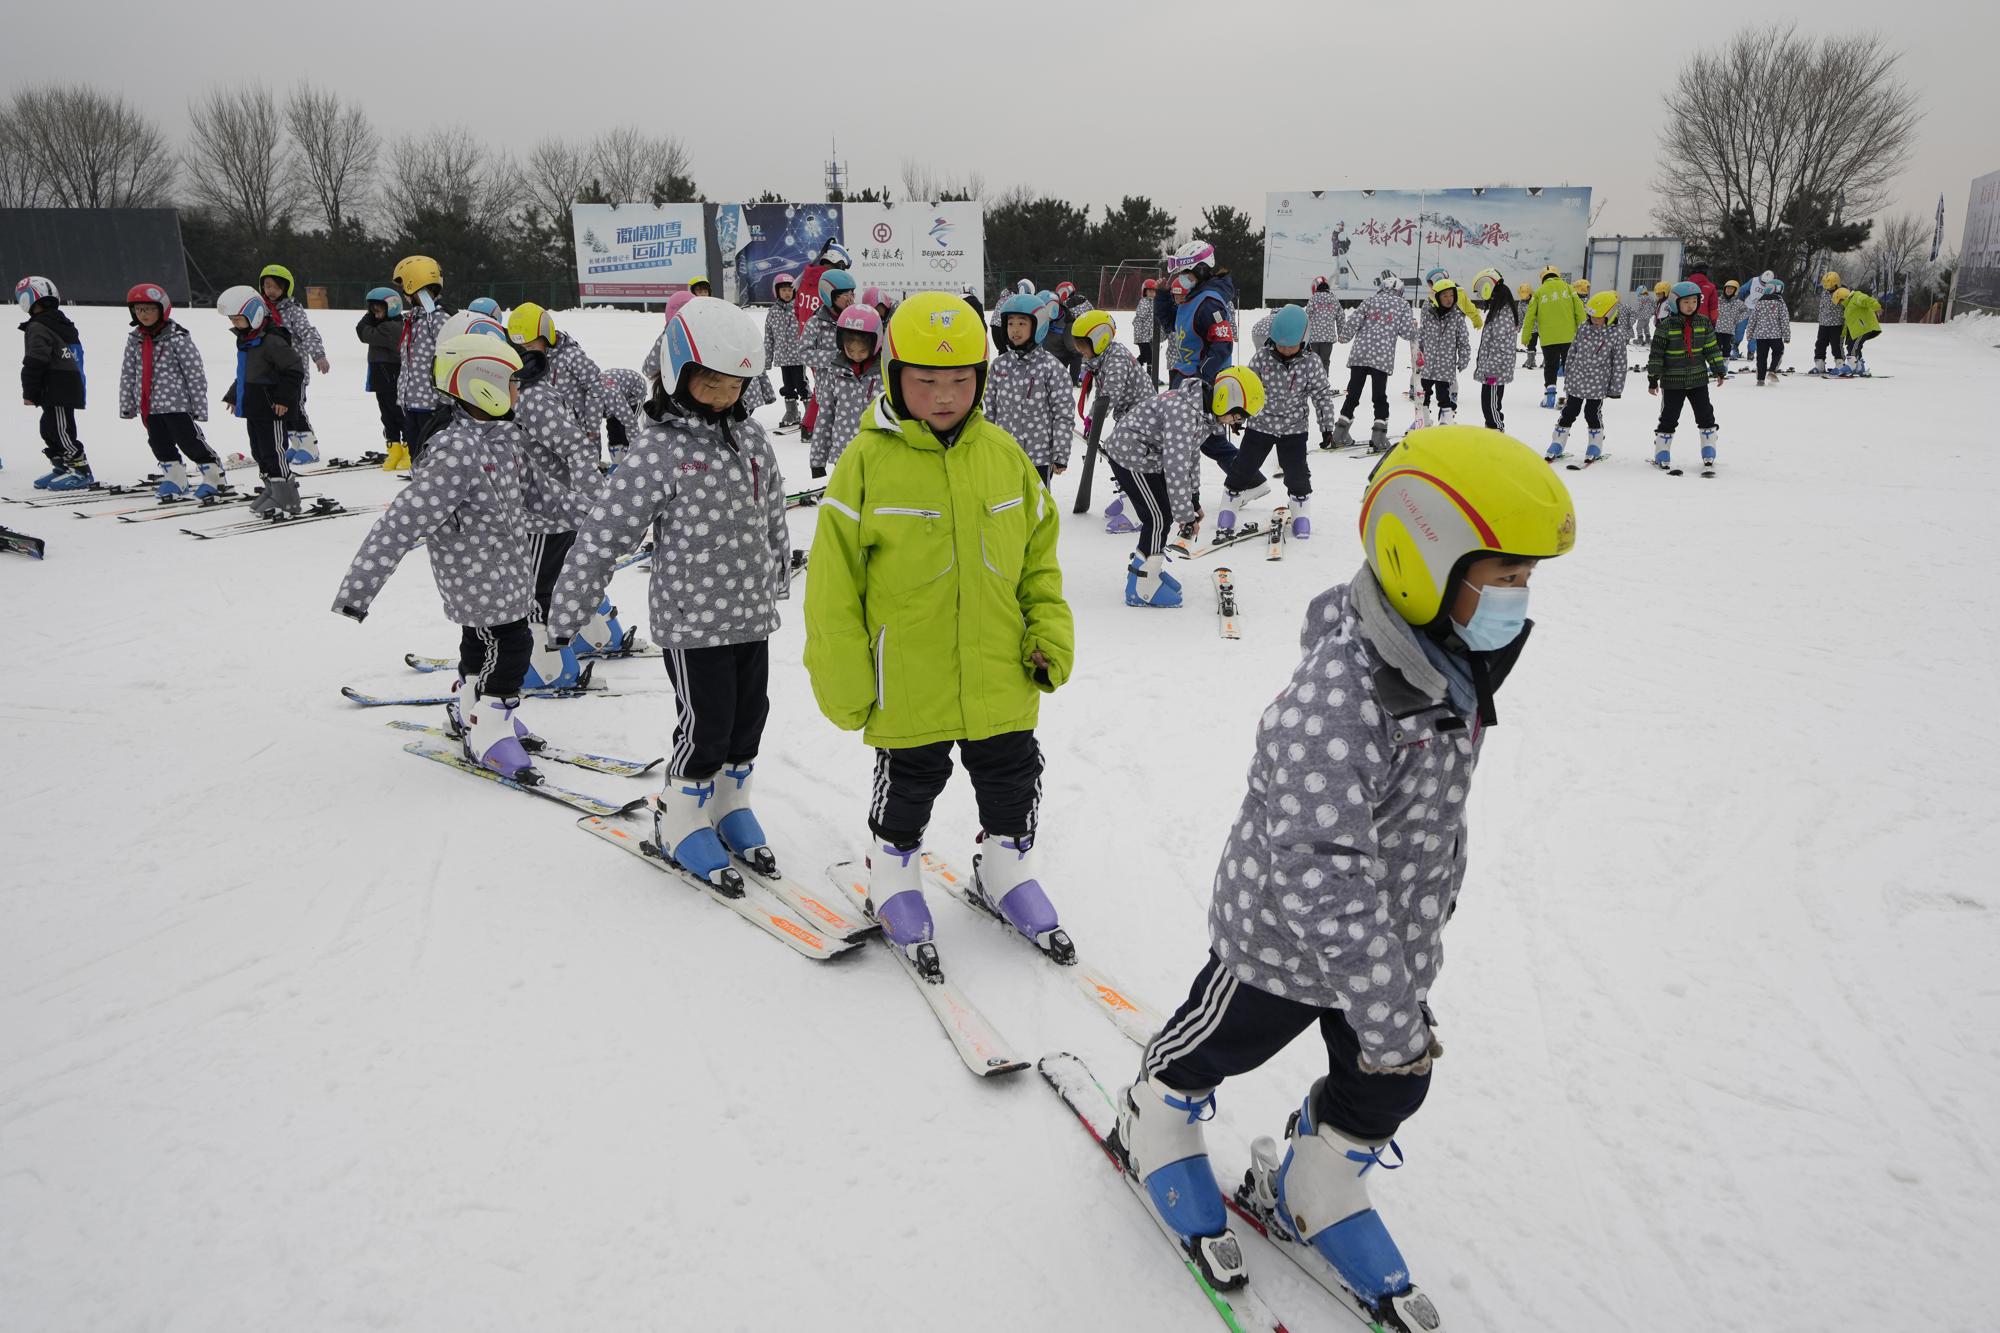 School children learning to ski take to the slope at the Vanke Shijinglong Ski Resort in Yanqing on the outskirts of Beijing, China, Thursday, Dec. 23, 2021. The Beijing Winter Olympics is tapping into and encouraging growing interest among Chinese in skiing, skating, hockey and other previously unfamiliar winter sports. It's also creating new business opportunities. (AP Photo/Ng Han Guan)